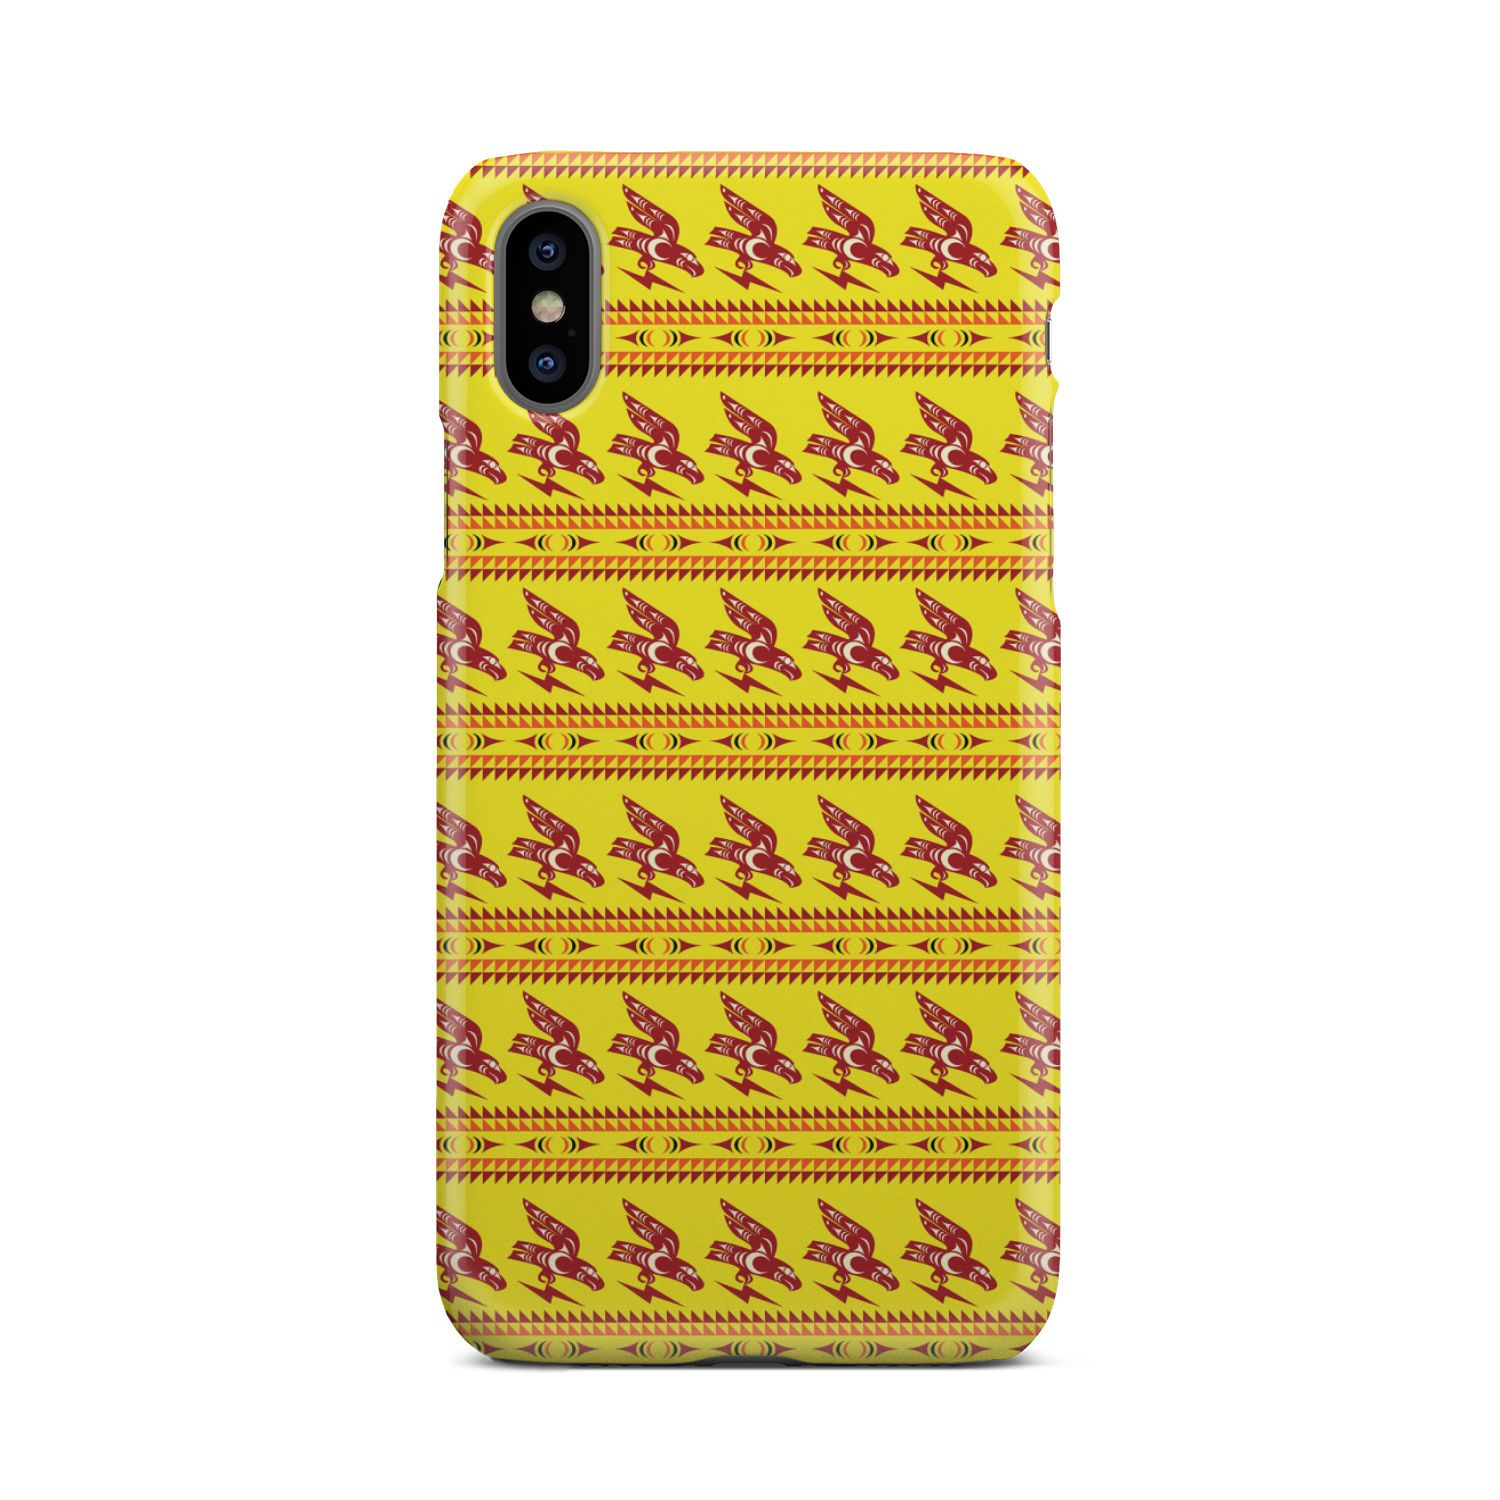 Ovila Mailhot Design : Eagle Brings Good Vibes Yellow Phone Case Phone Case wc-fulfillment iPhone X 